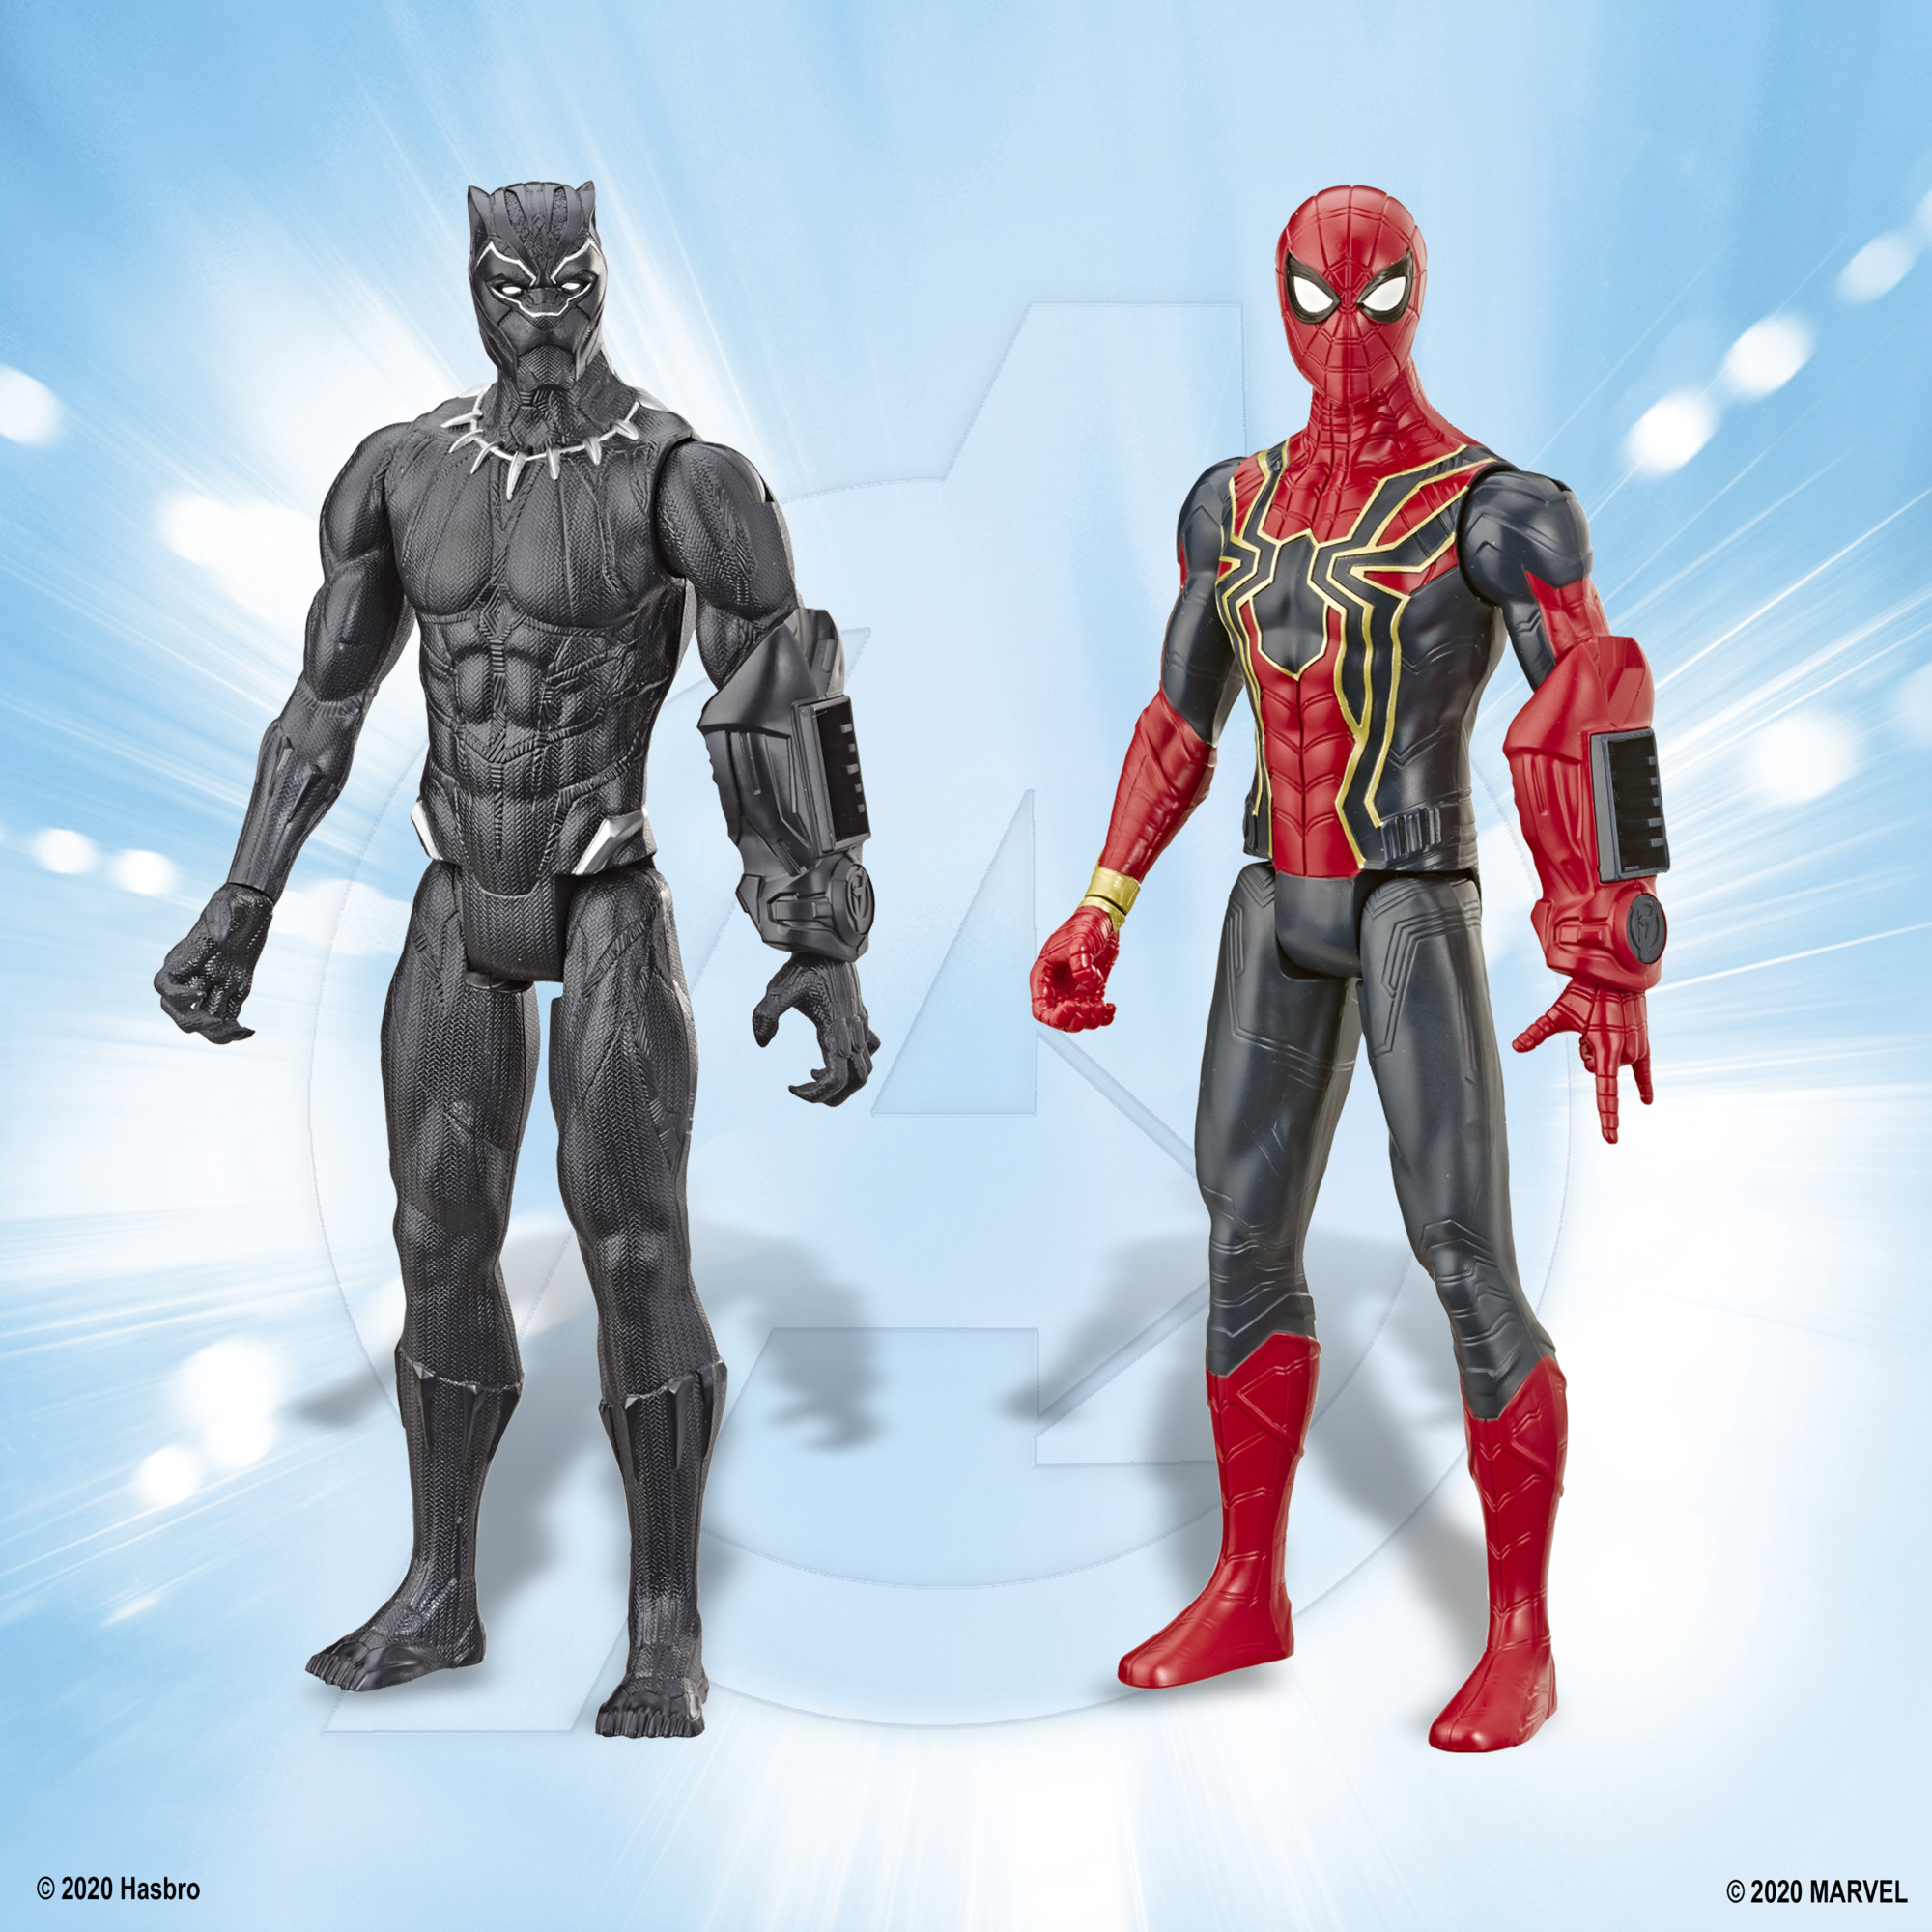 Marvel Avengers: Titan Hero Series Captain America, Iron Spider, Black Panther, and Iron Man Kids Toy Action Figure for Boys and Girls (12") - image 5 of 7